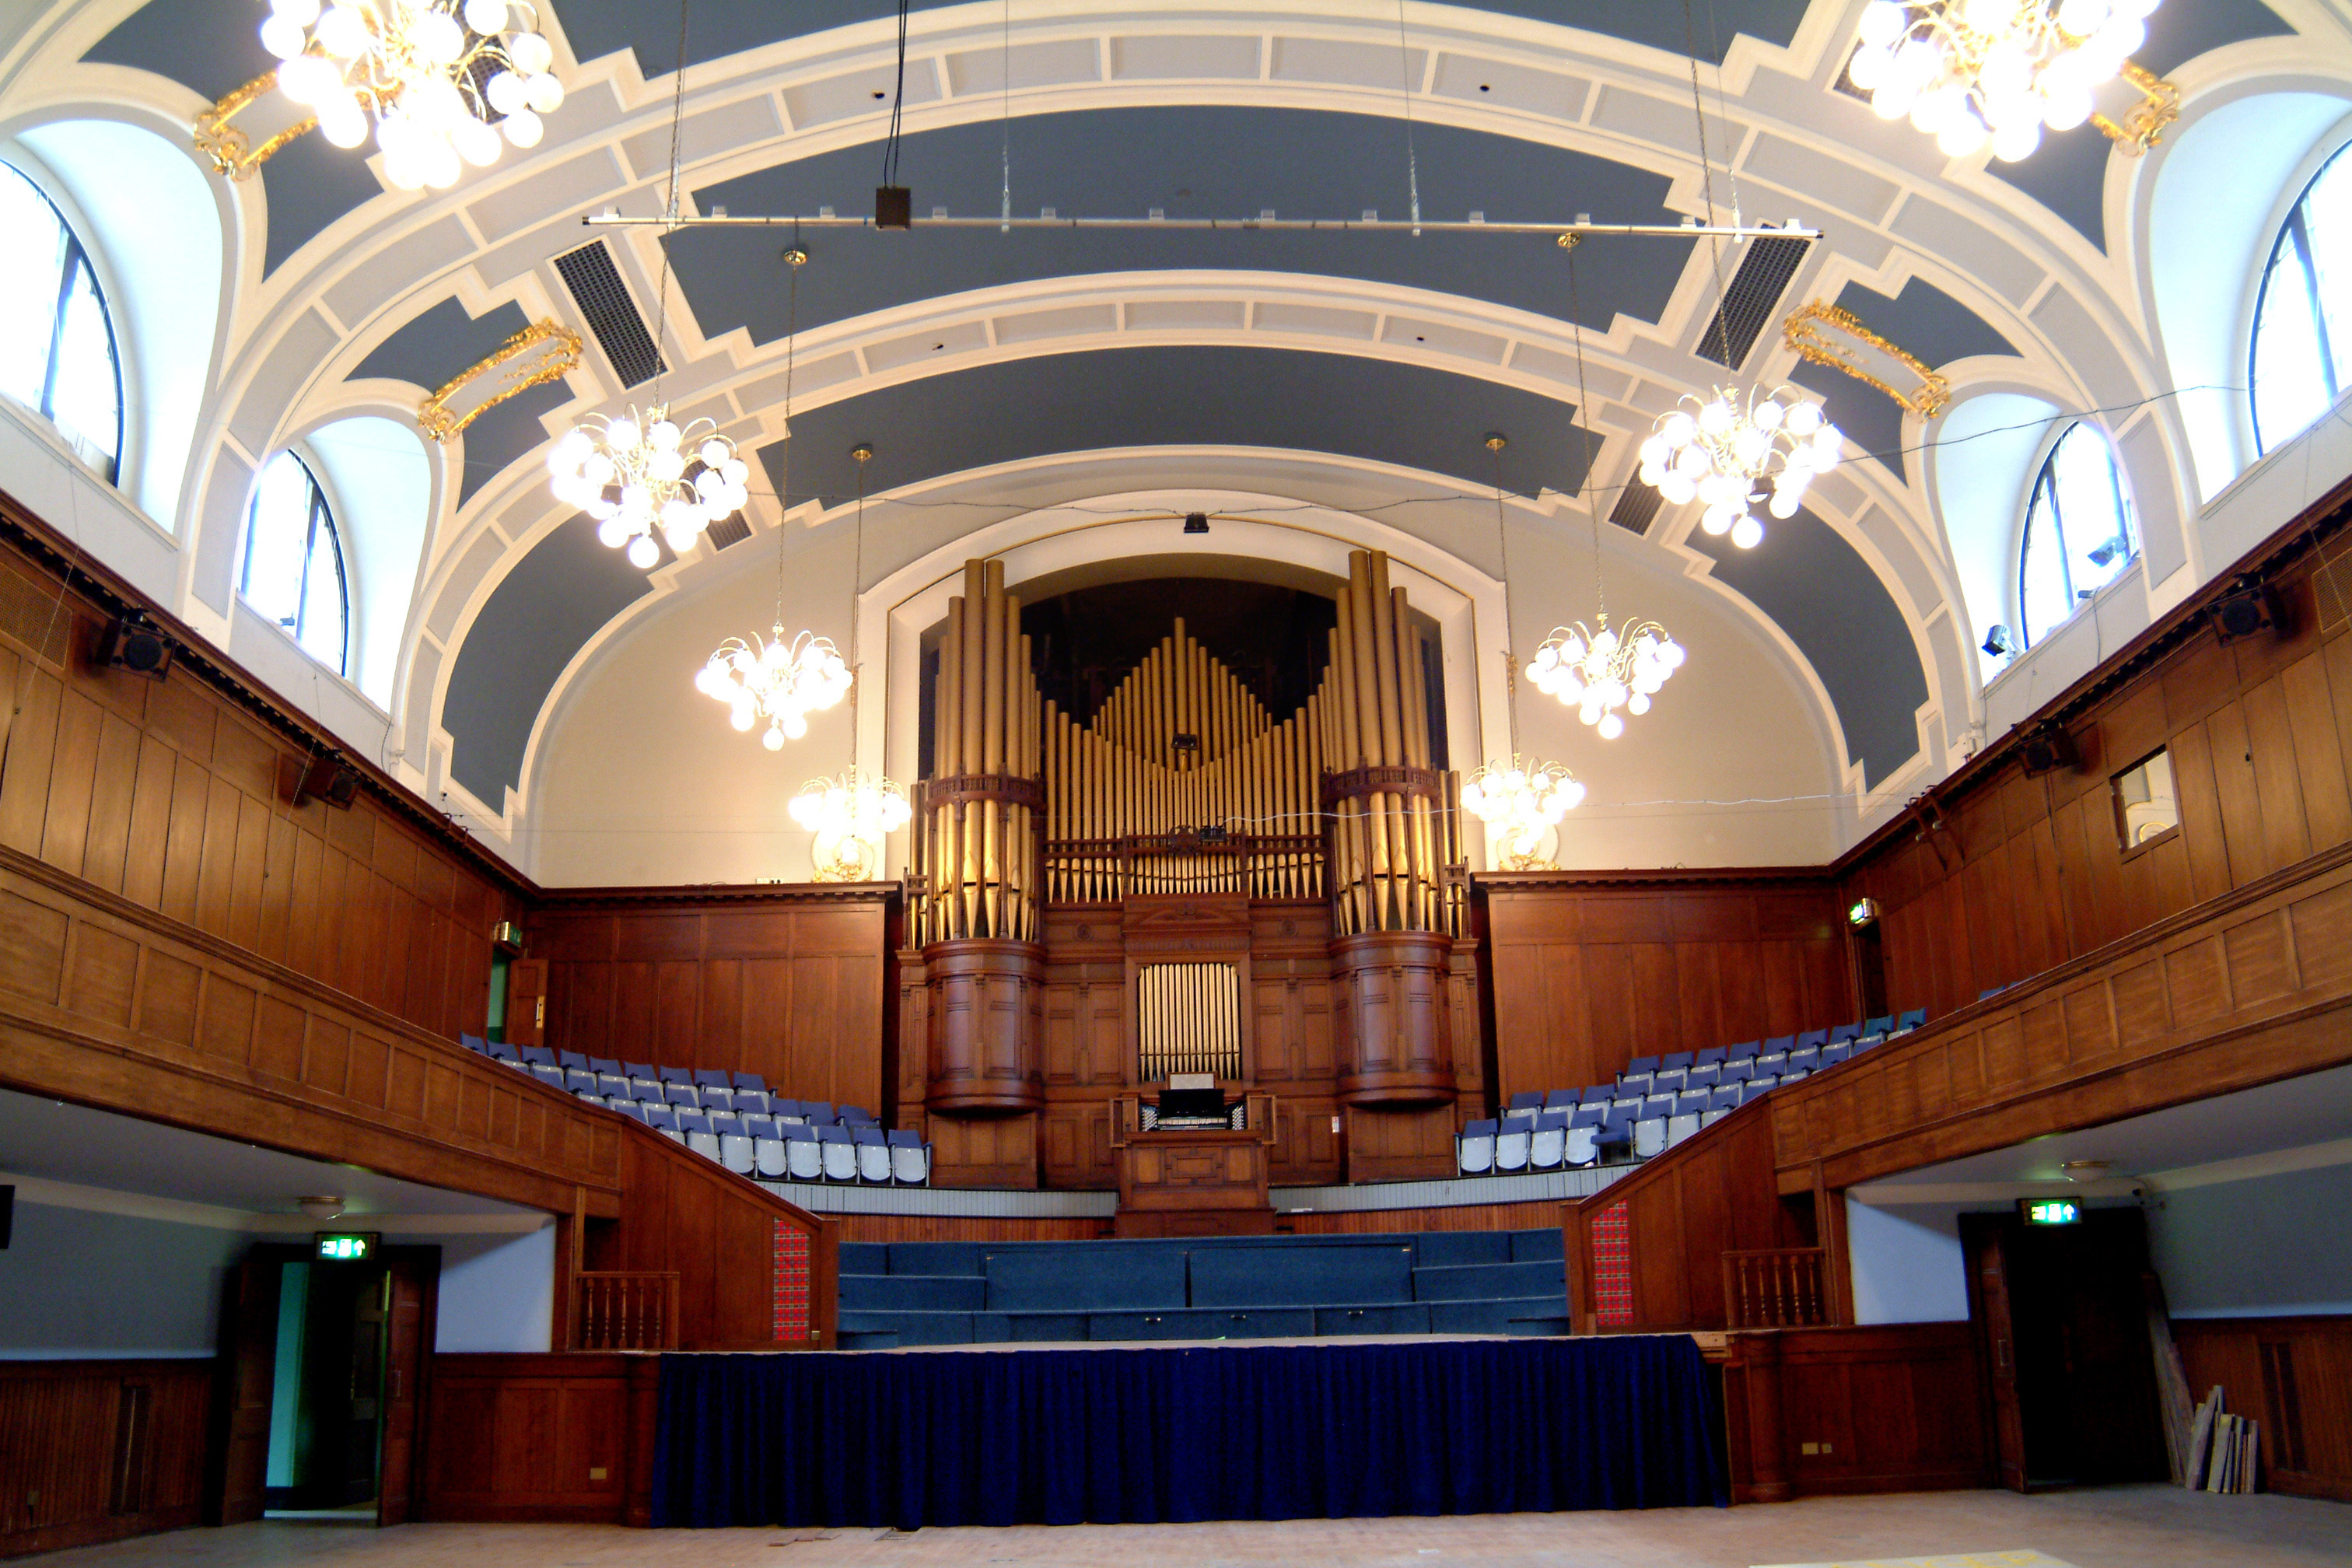 The inside of Perth City Hall, as it looked in 2011 before the organ was removed.